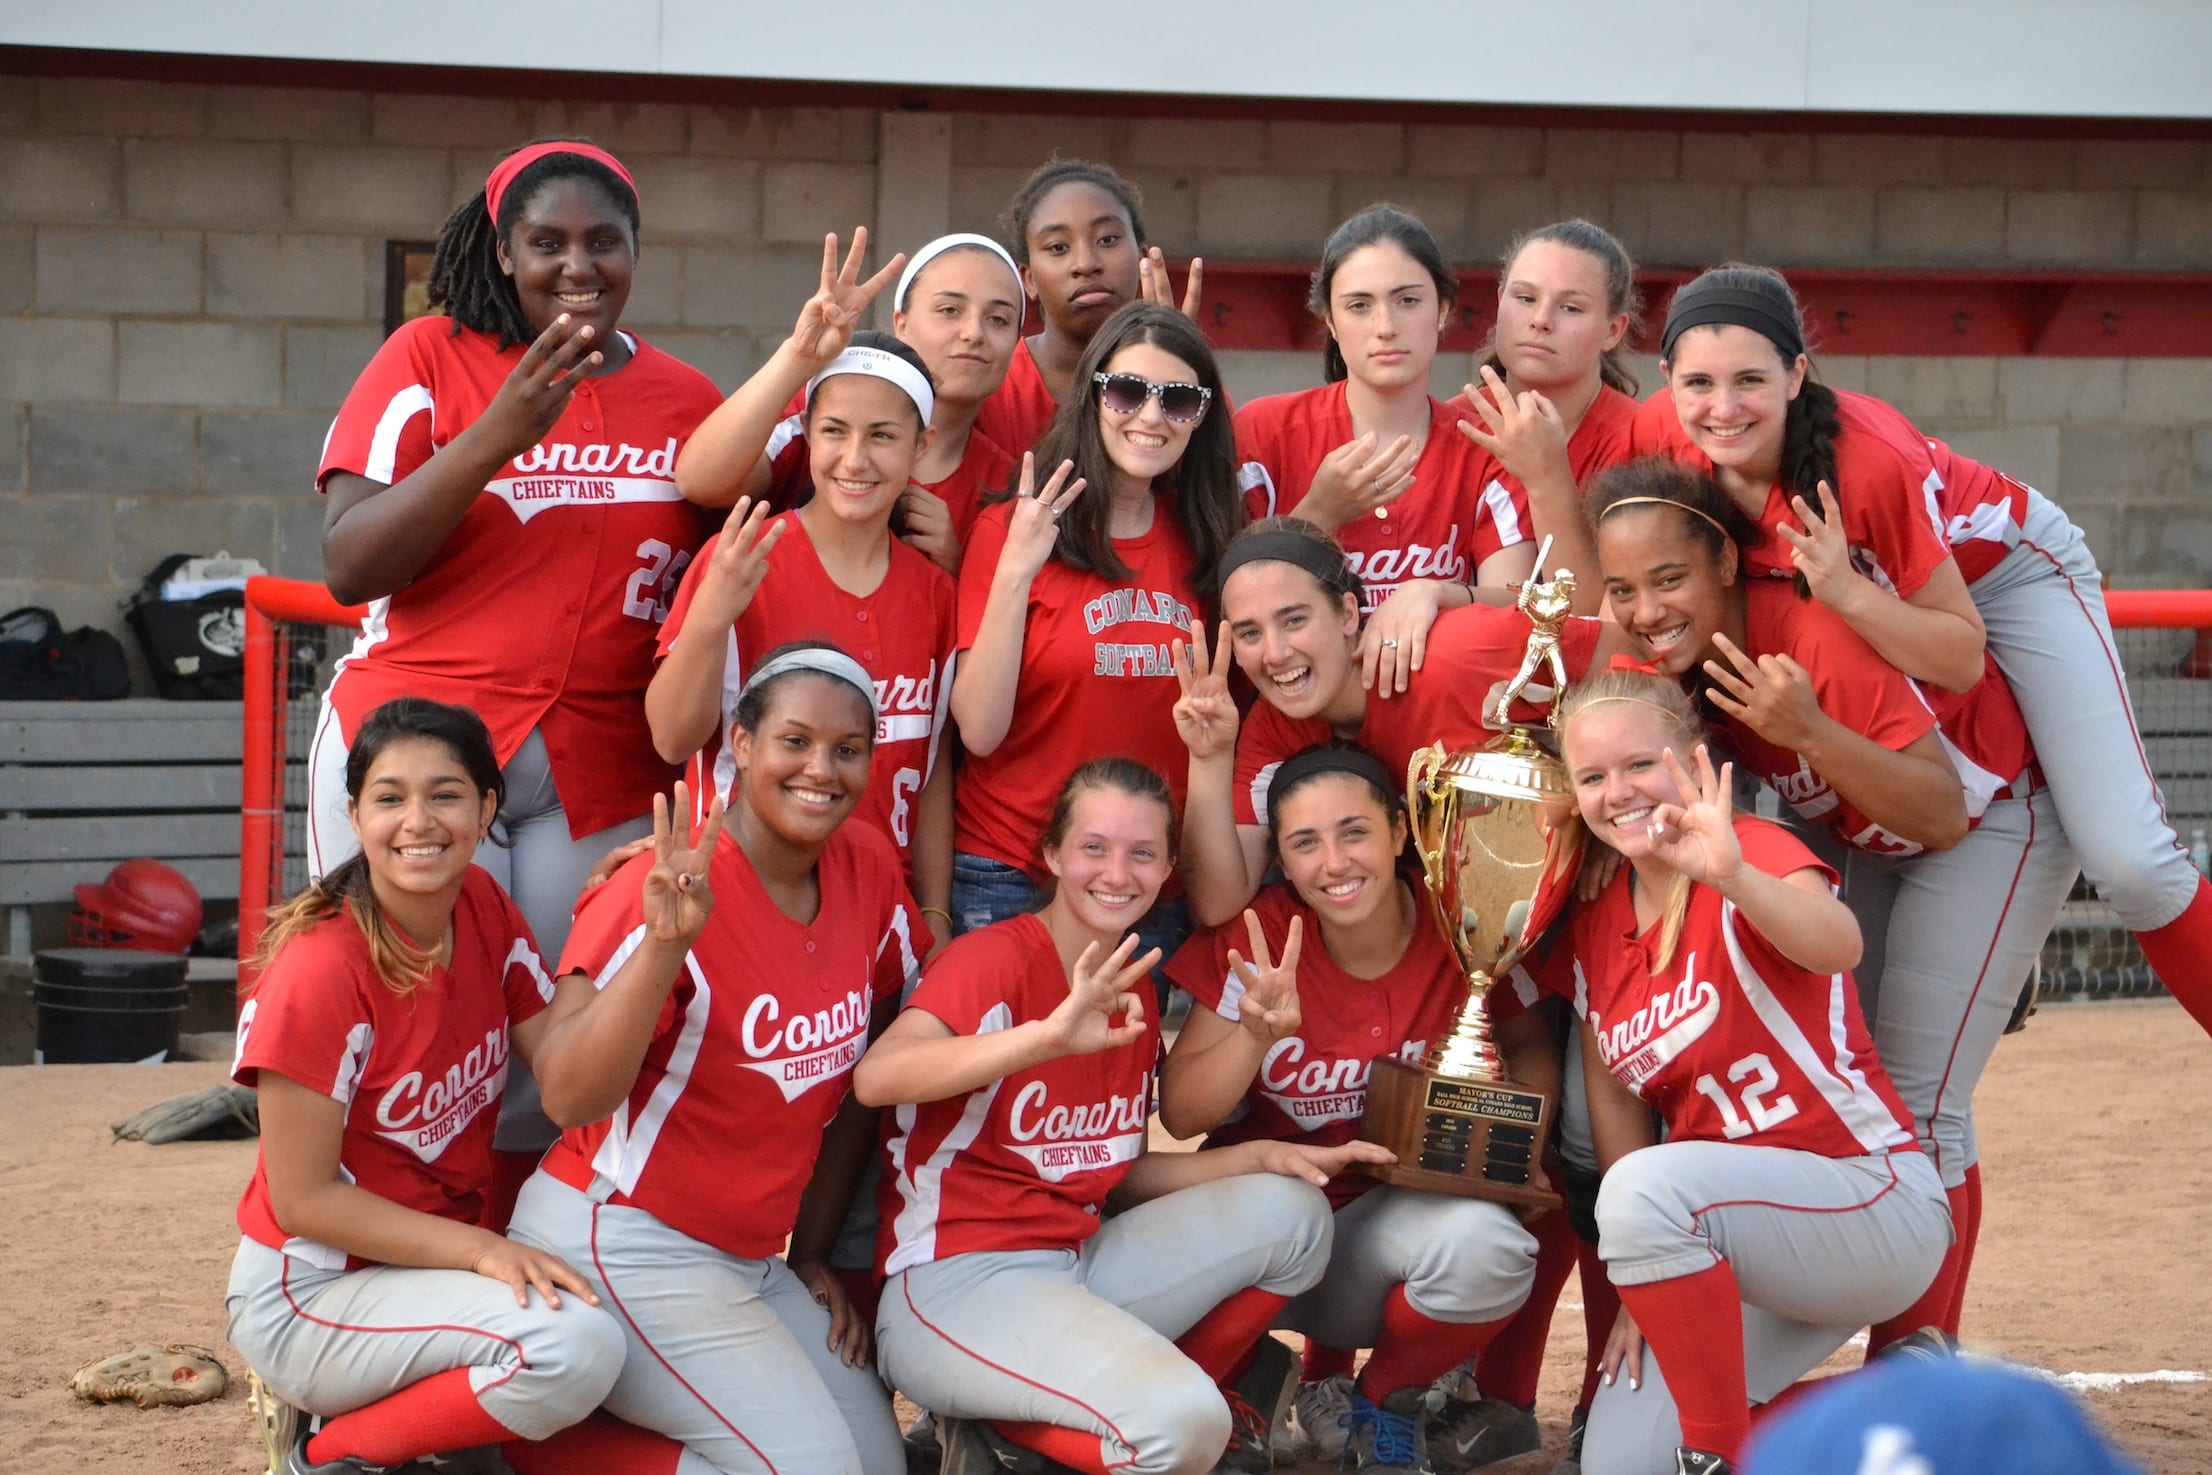 Conard Takes Home Mayors Cup in Softball Win Over Hall